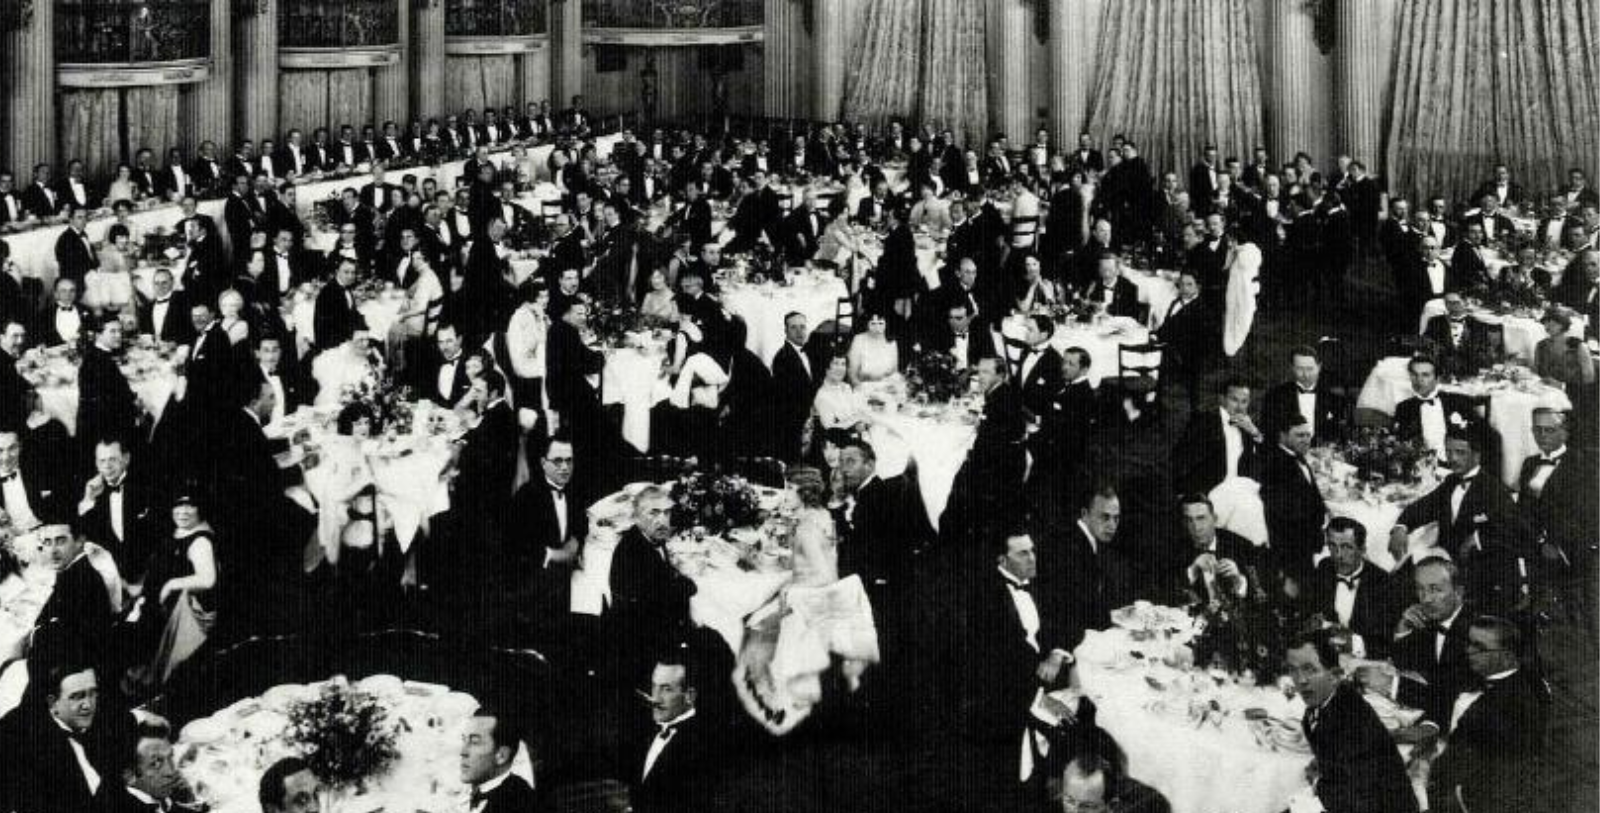 Discover the star-studded history of The Biltmore Los Angeles, which witnessed the founding of the Academy Awards.